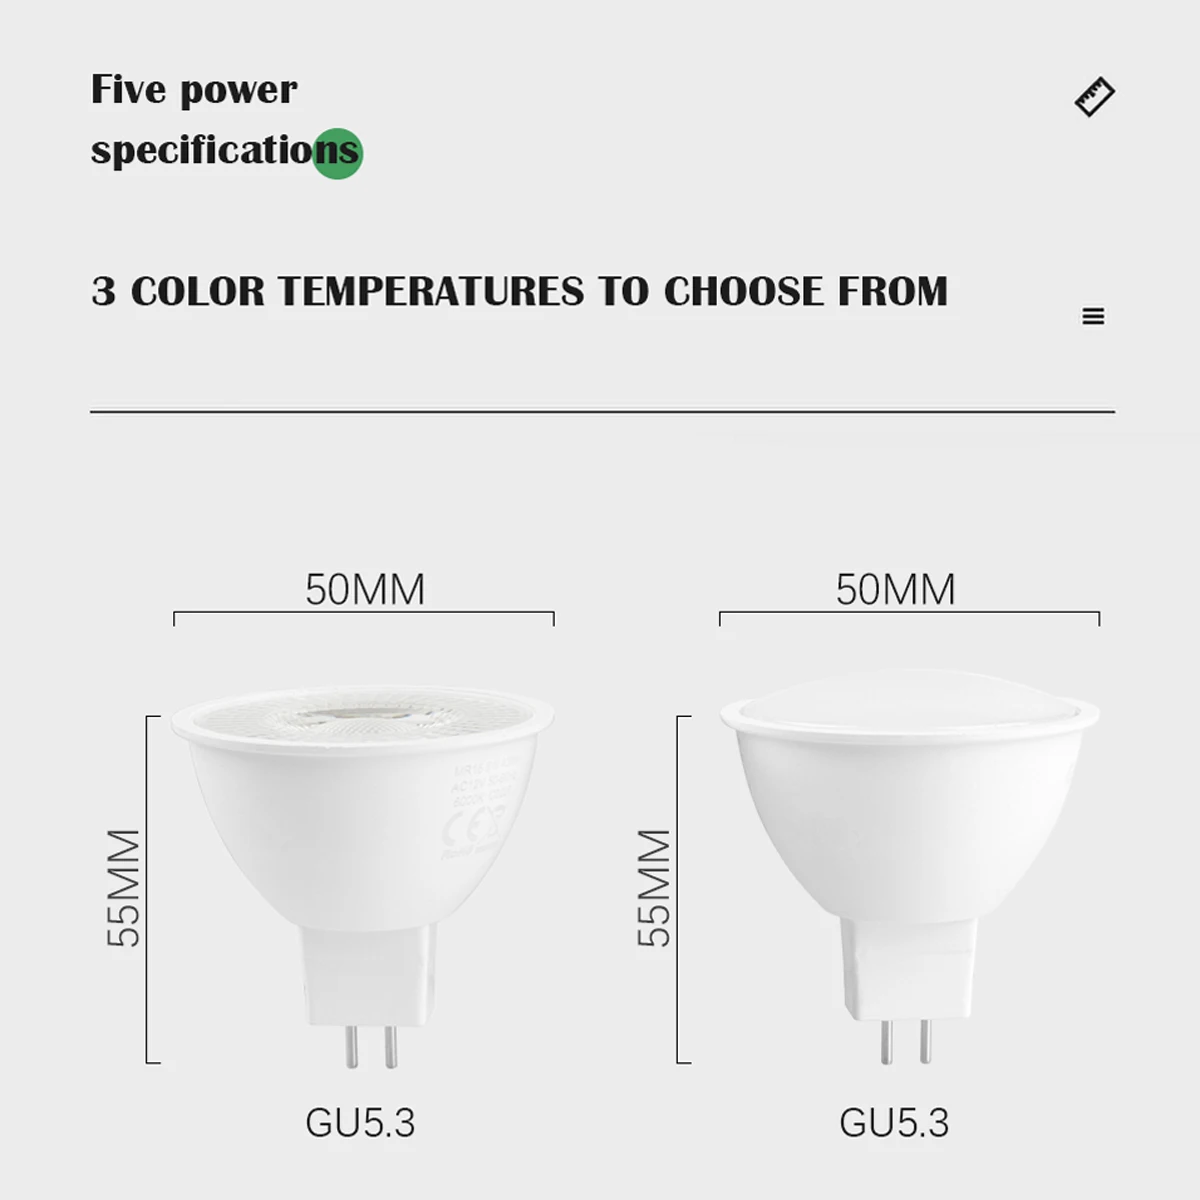 LED Spotlight MR16 GU5.3 low pressure AC/DC 12V 3W-7W High display refers to no strobe applicable to children's room, kitchen images - 6